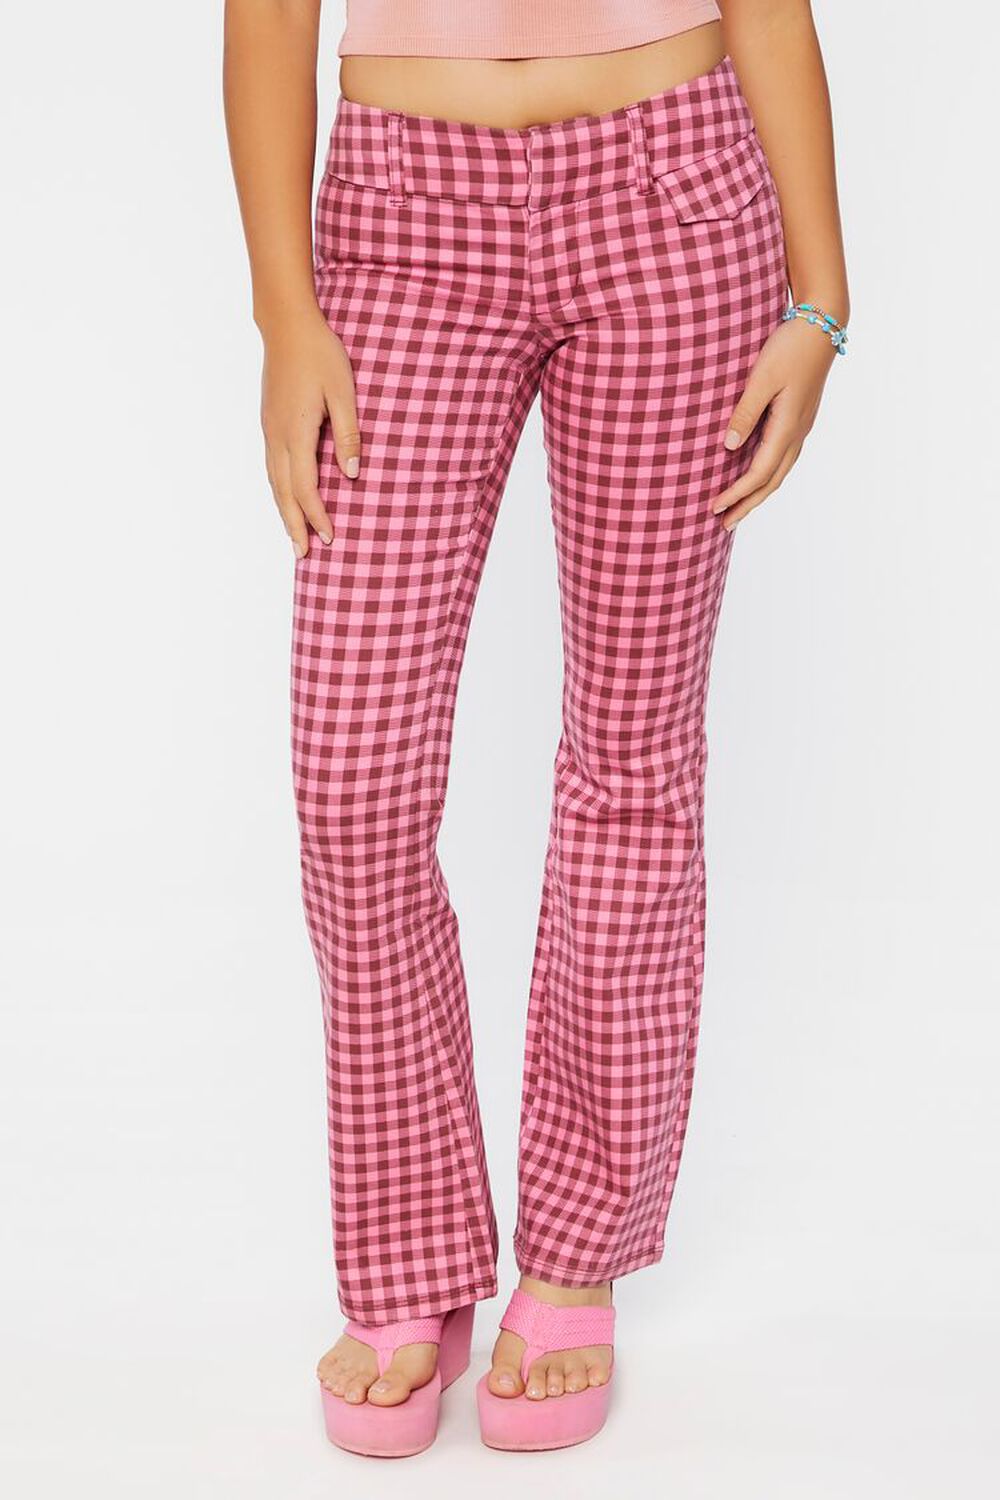 Gingham Low-Rise Flare Pants, image 2